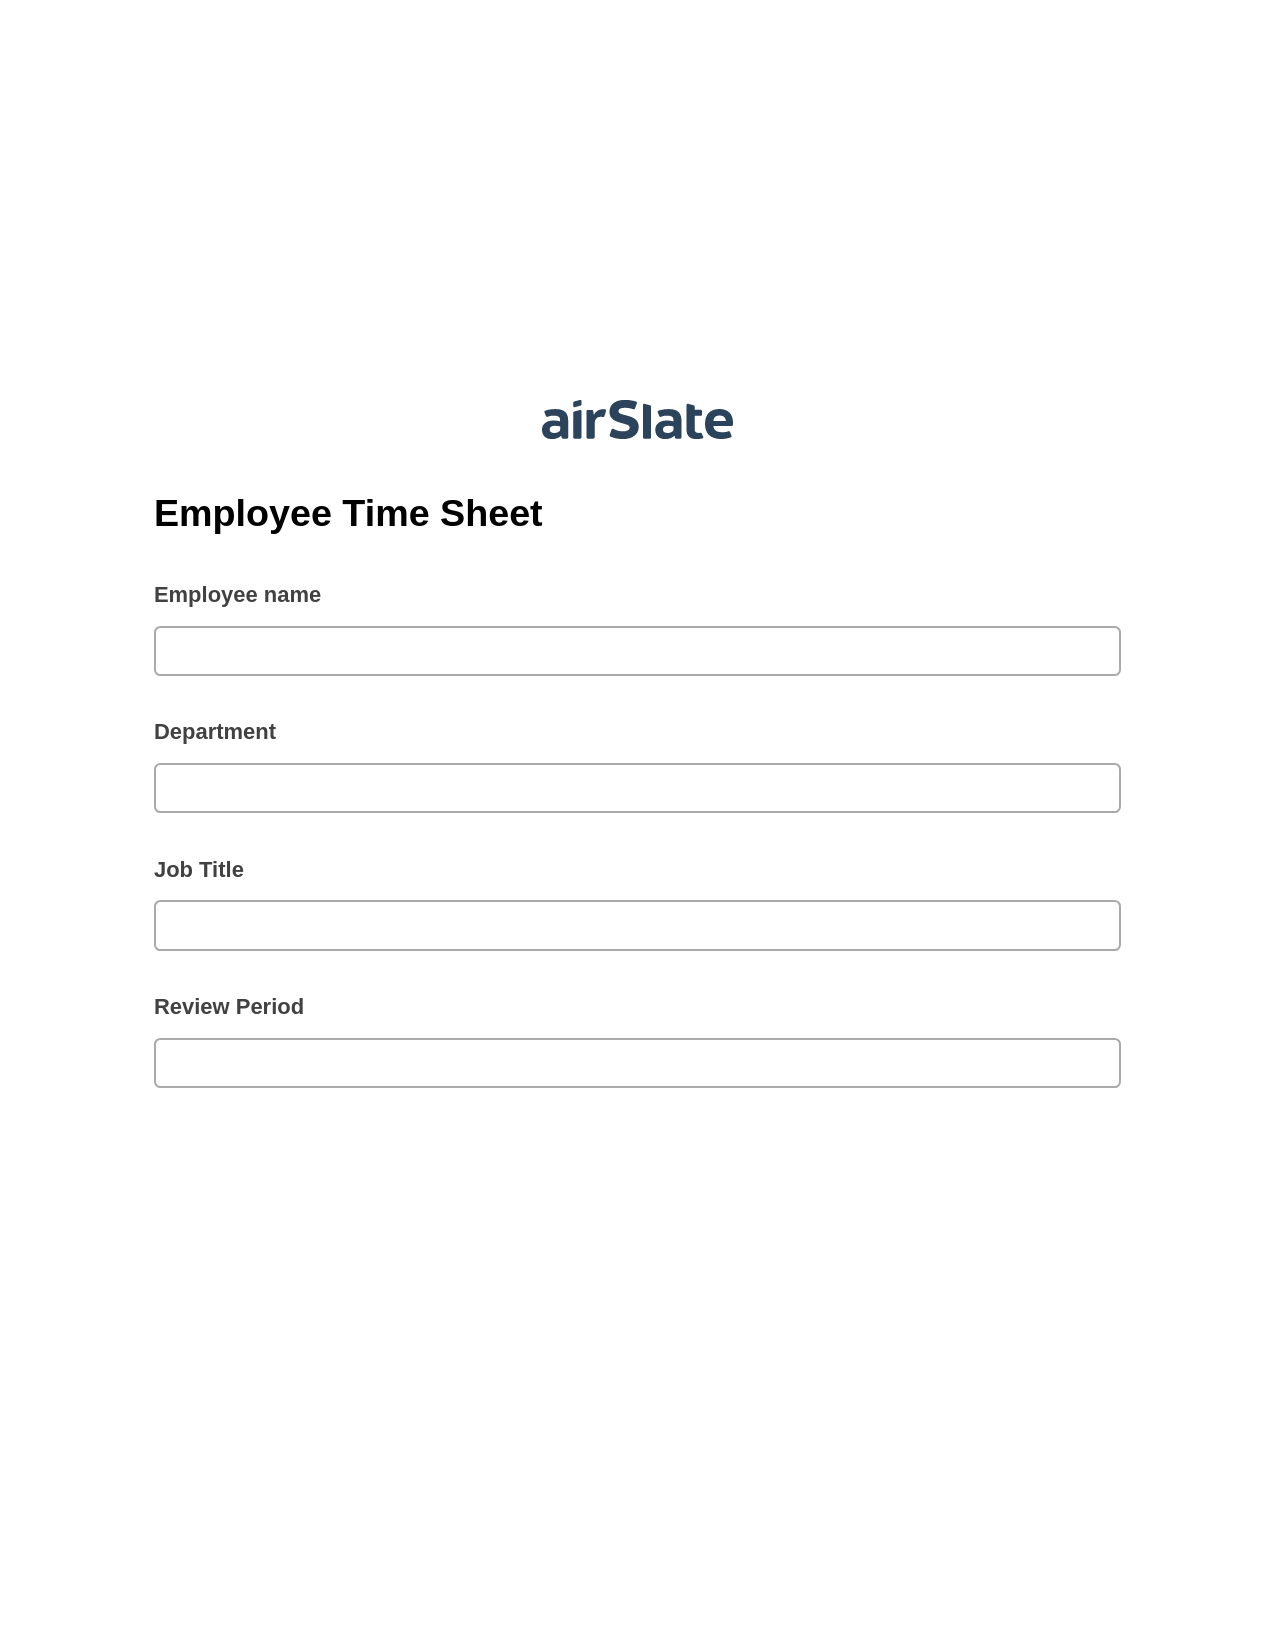 Employee Time Sheet Pre-fill from CSV File Bot, Update Audit Trail Bot, Export to Salesforce Record Bot